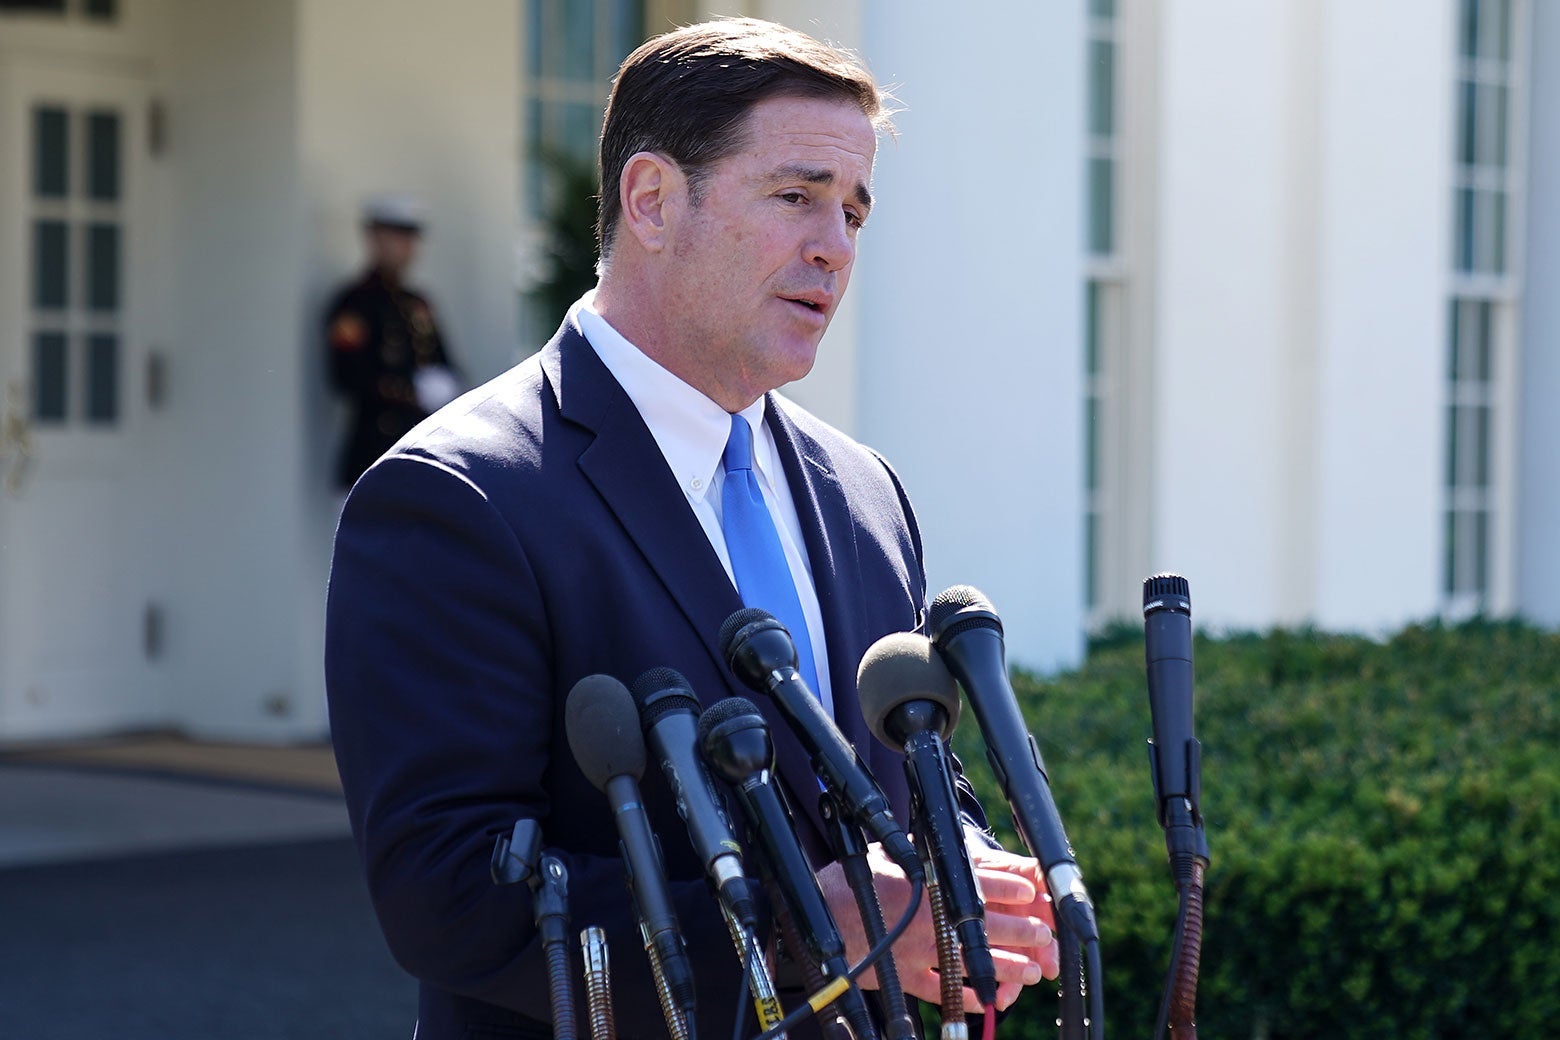 Arizona Gov. Doug Ducey at the White House in April 2019.